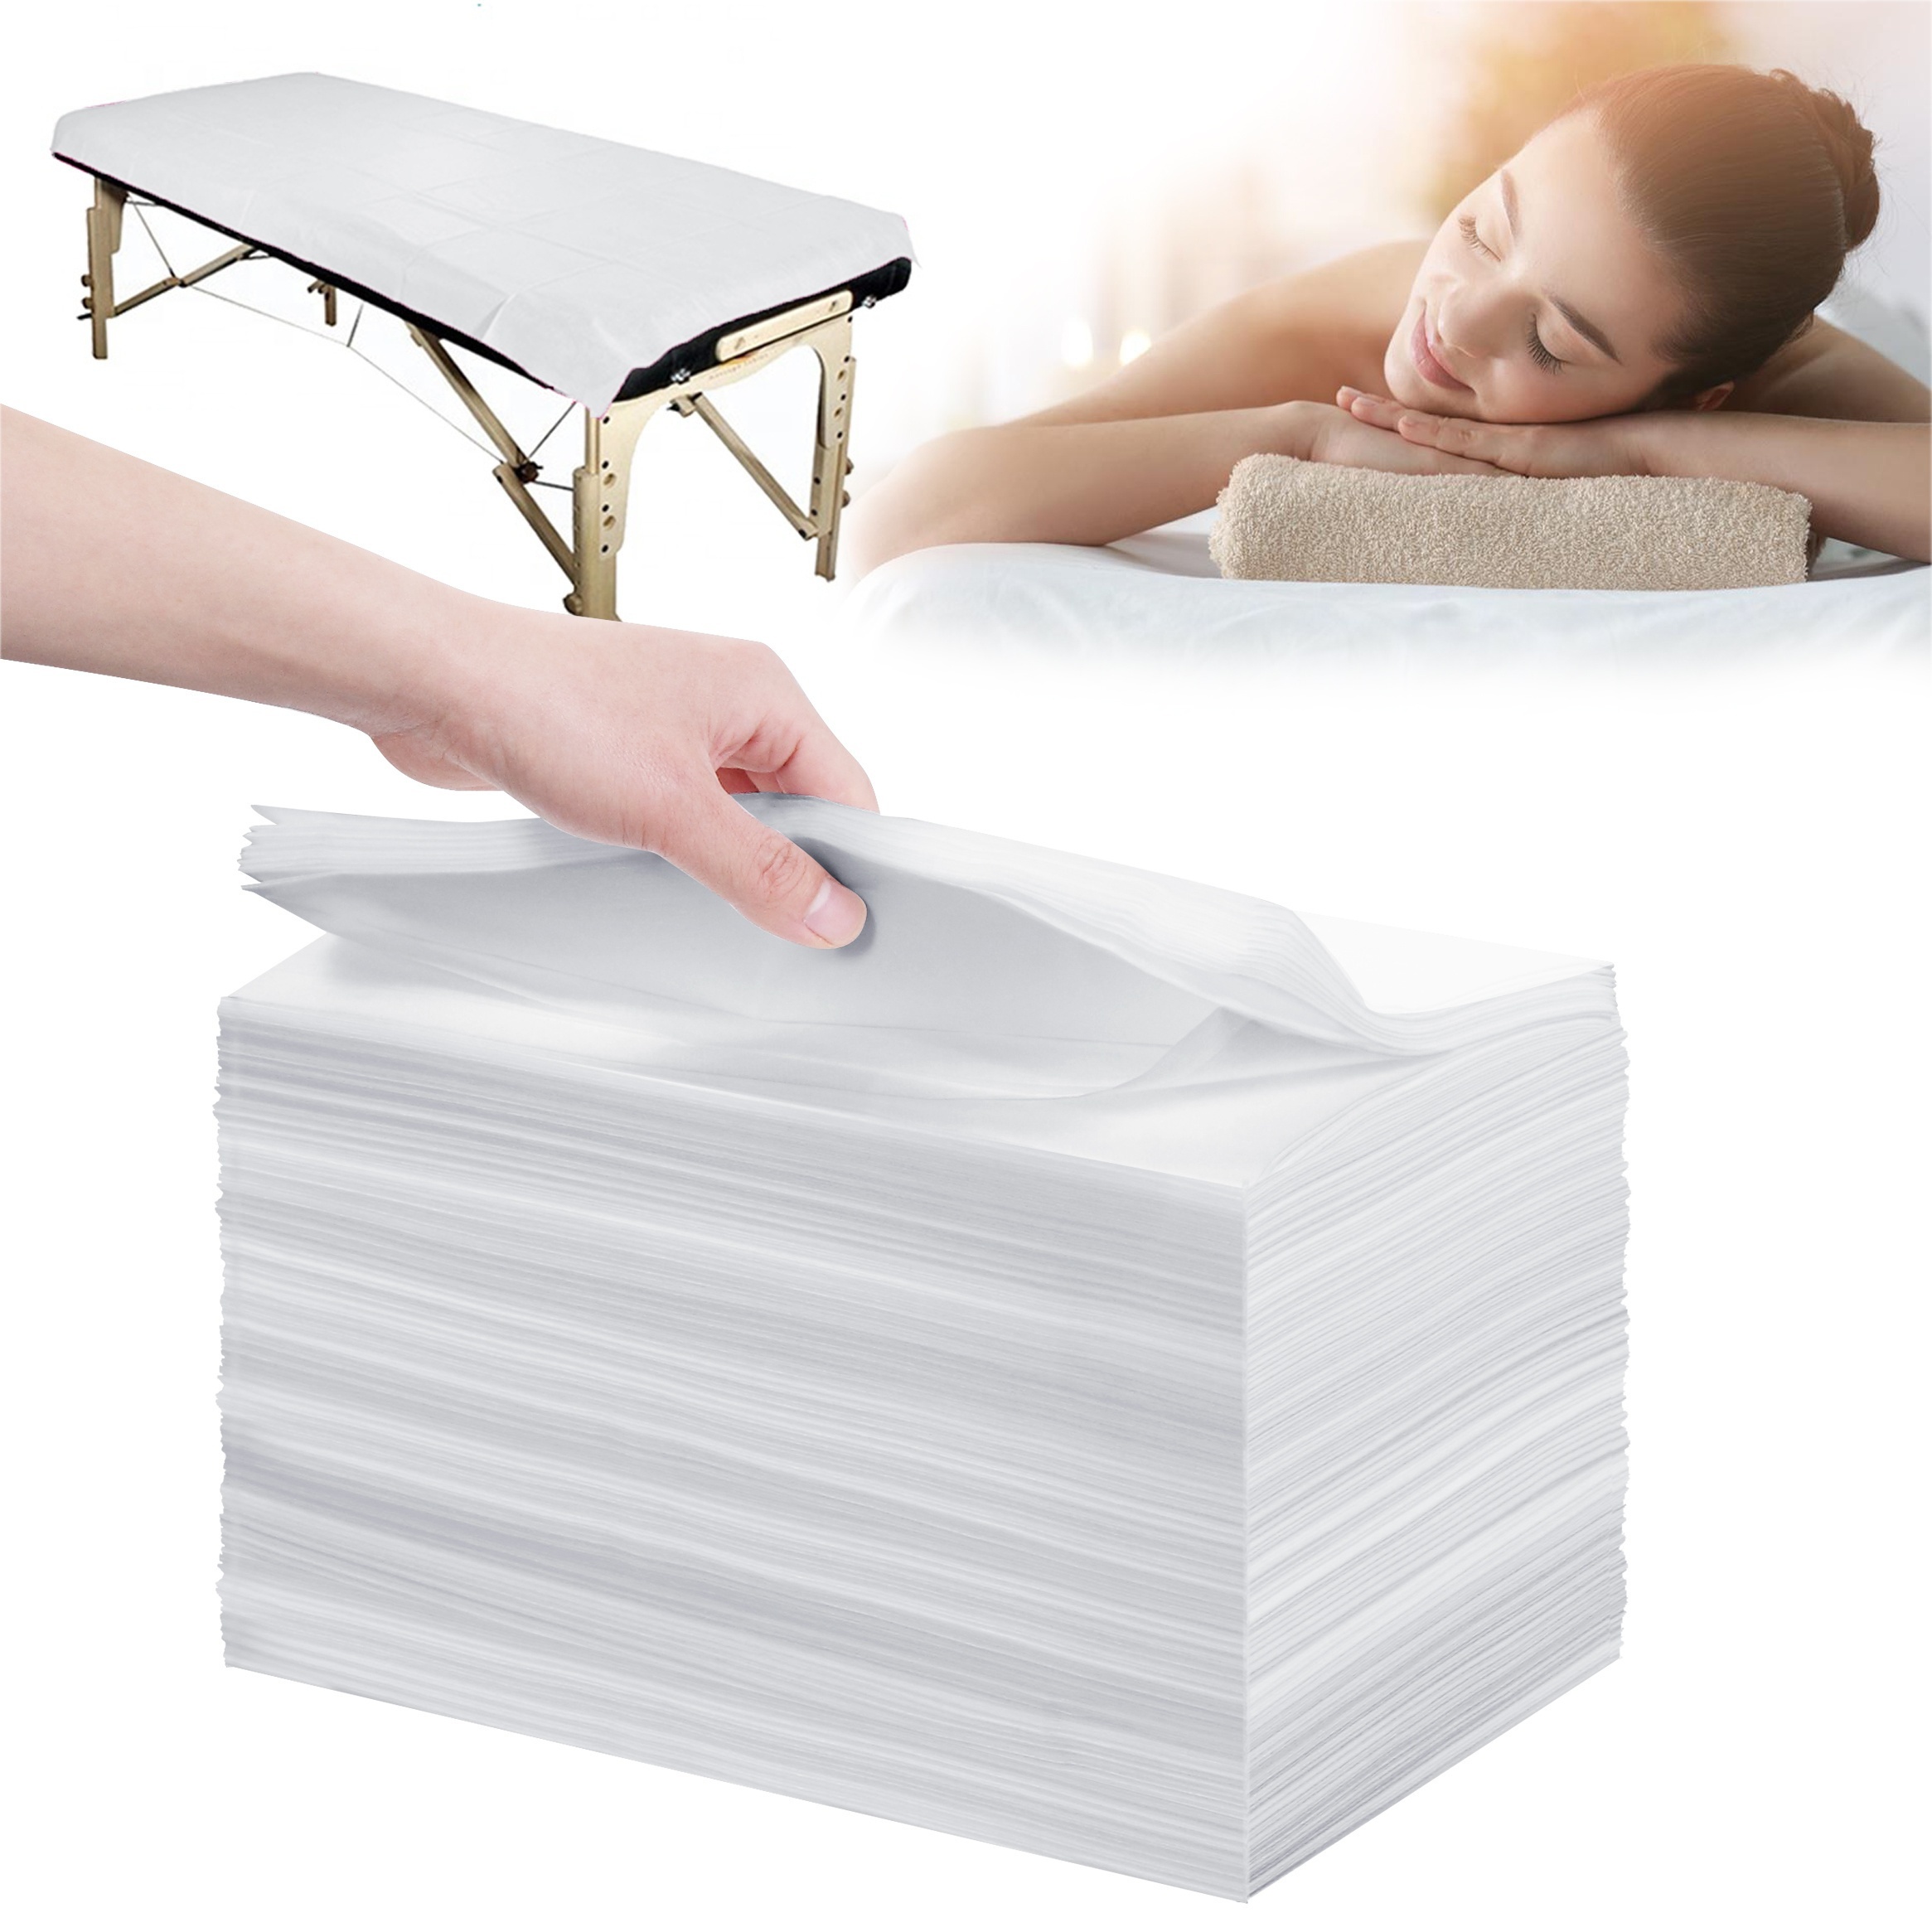 

Disposable Bed Sheets 31" X 71" Massage Table Sheets Non Woven Fabric Spa Bed Cover Breathable For Massage Beauty Tattoos (white)